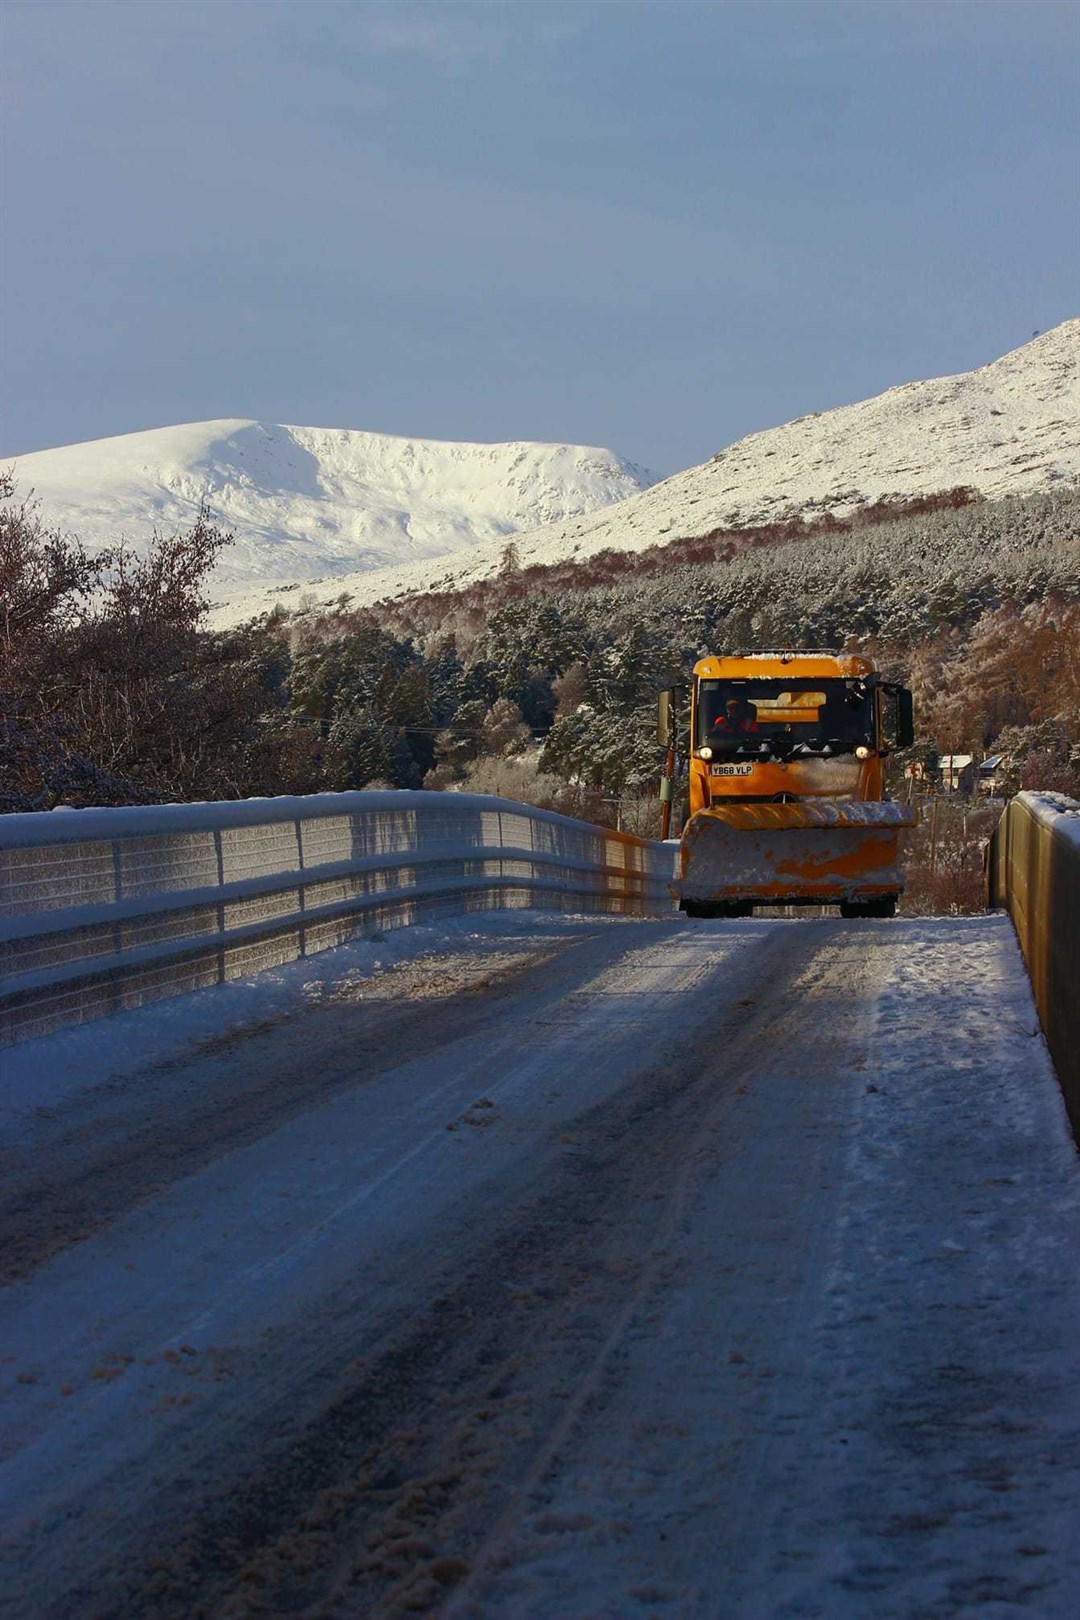 Road treatment continues across the strath